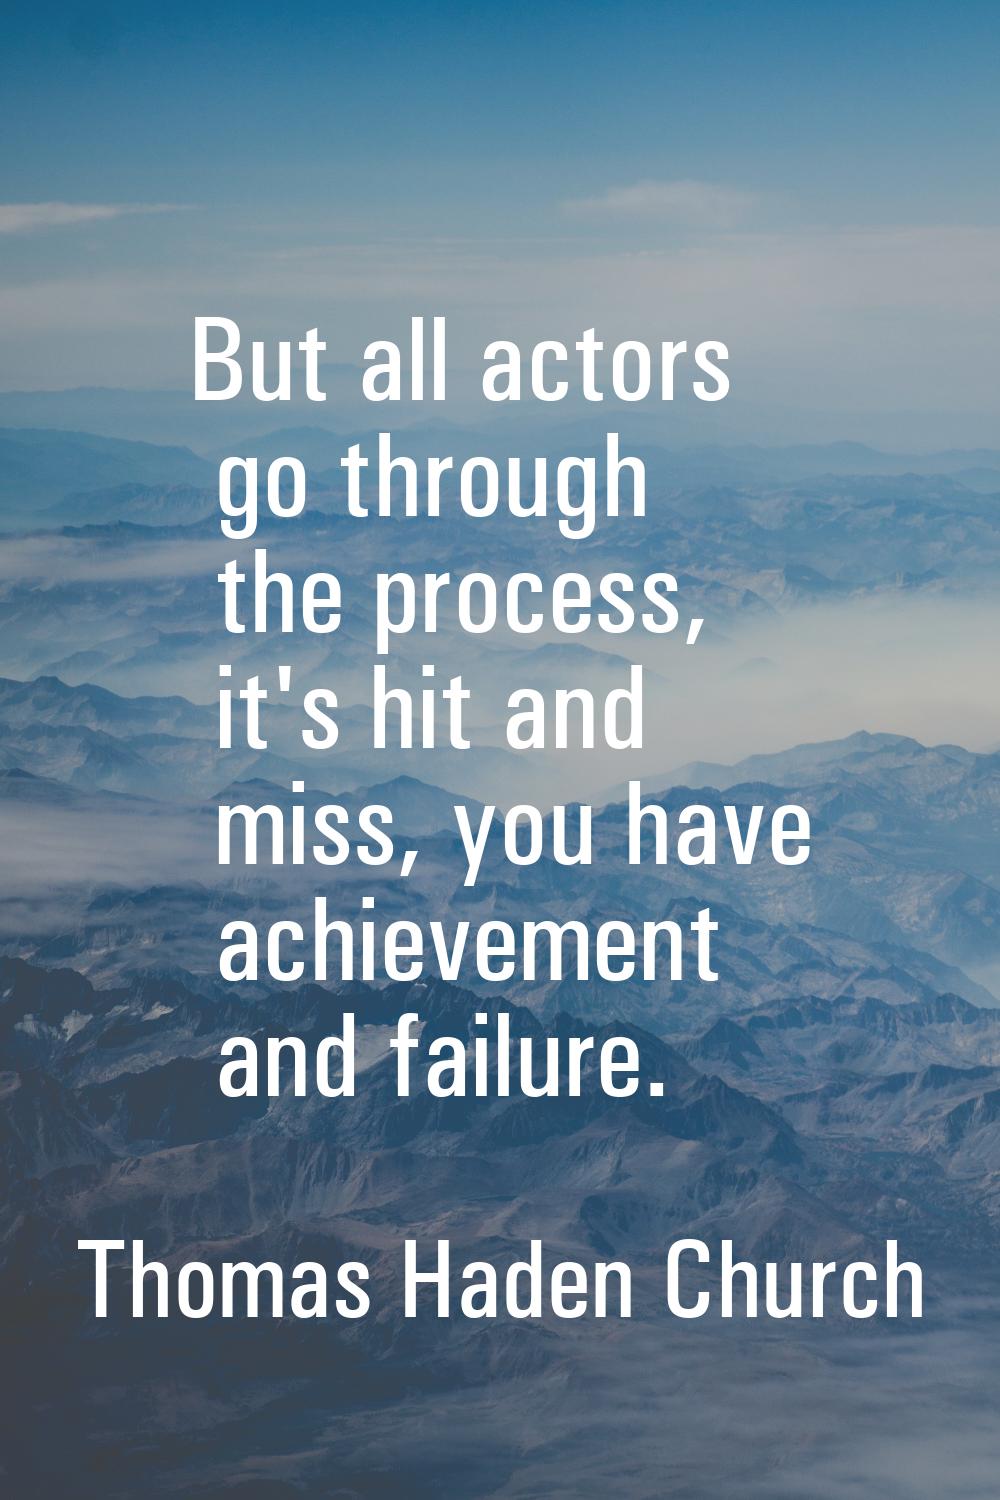 But all actors go through the process, it's hit and miss, you have achievement and failure.